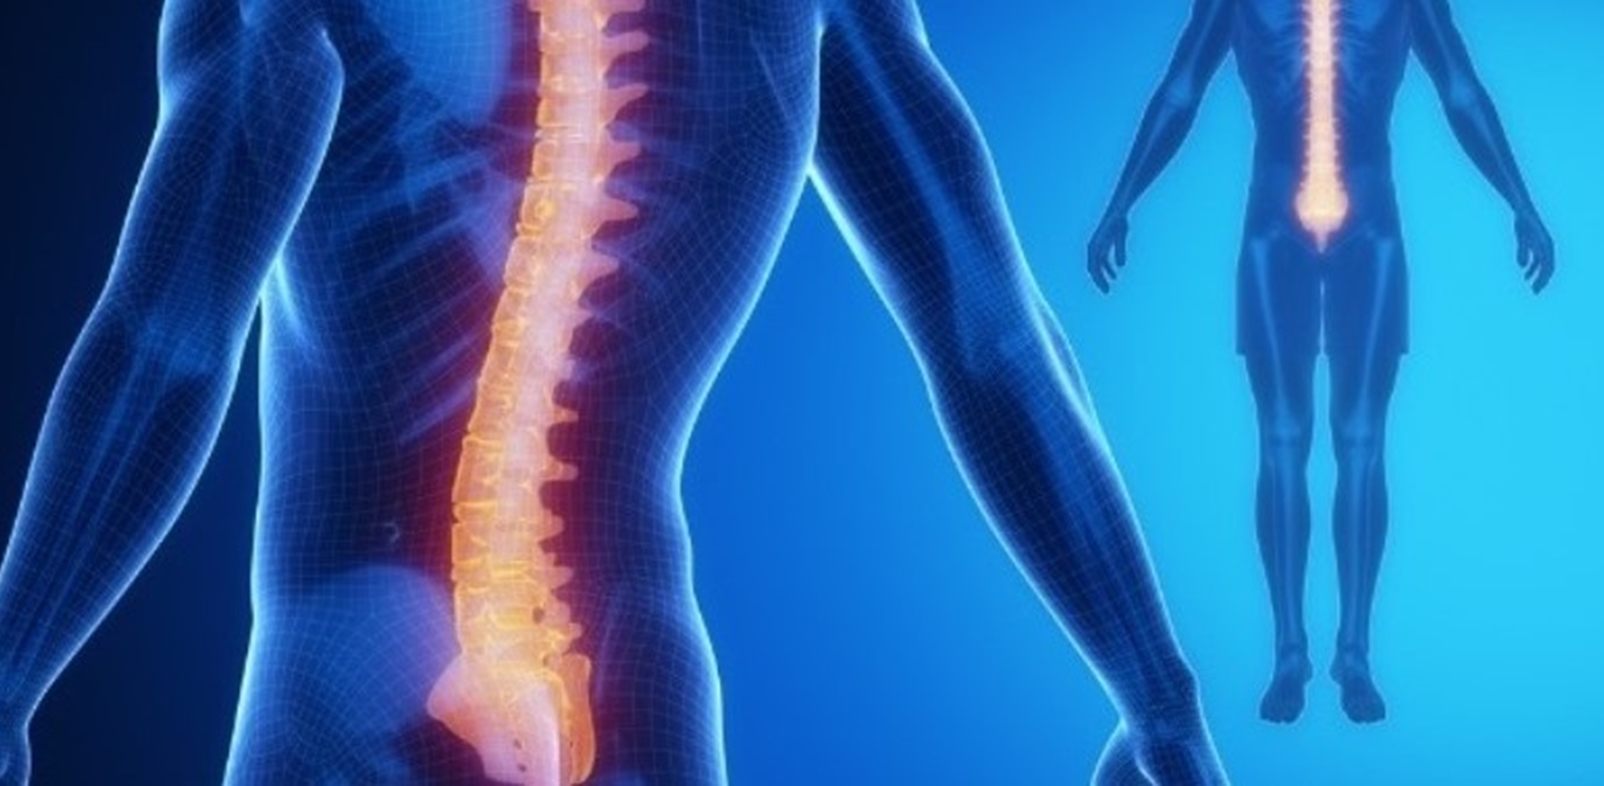 spine-injuries-and-spinal-problems